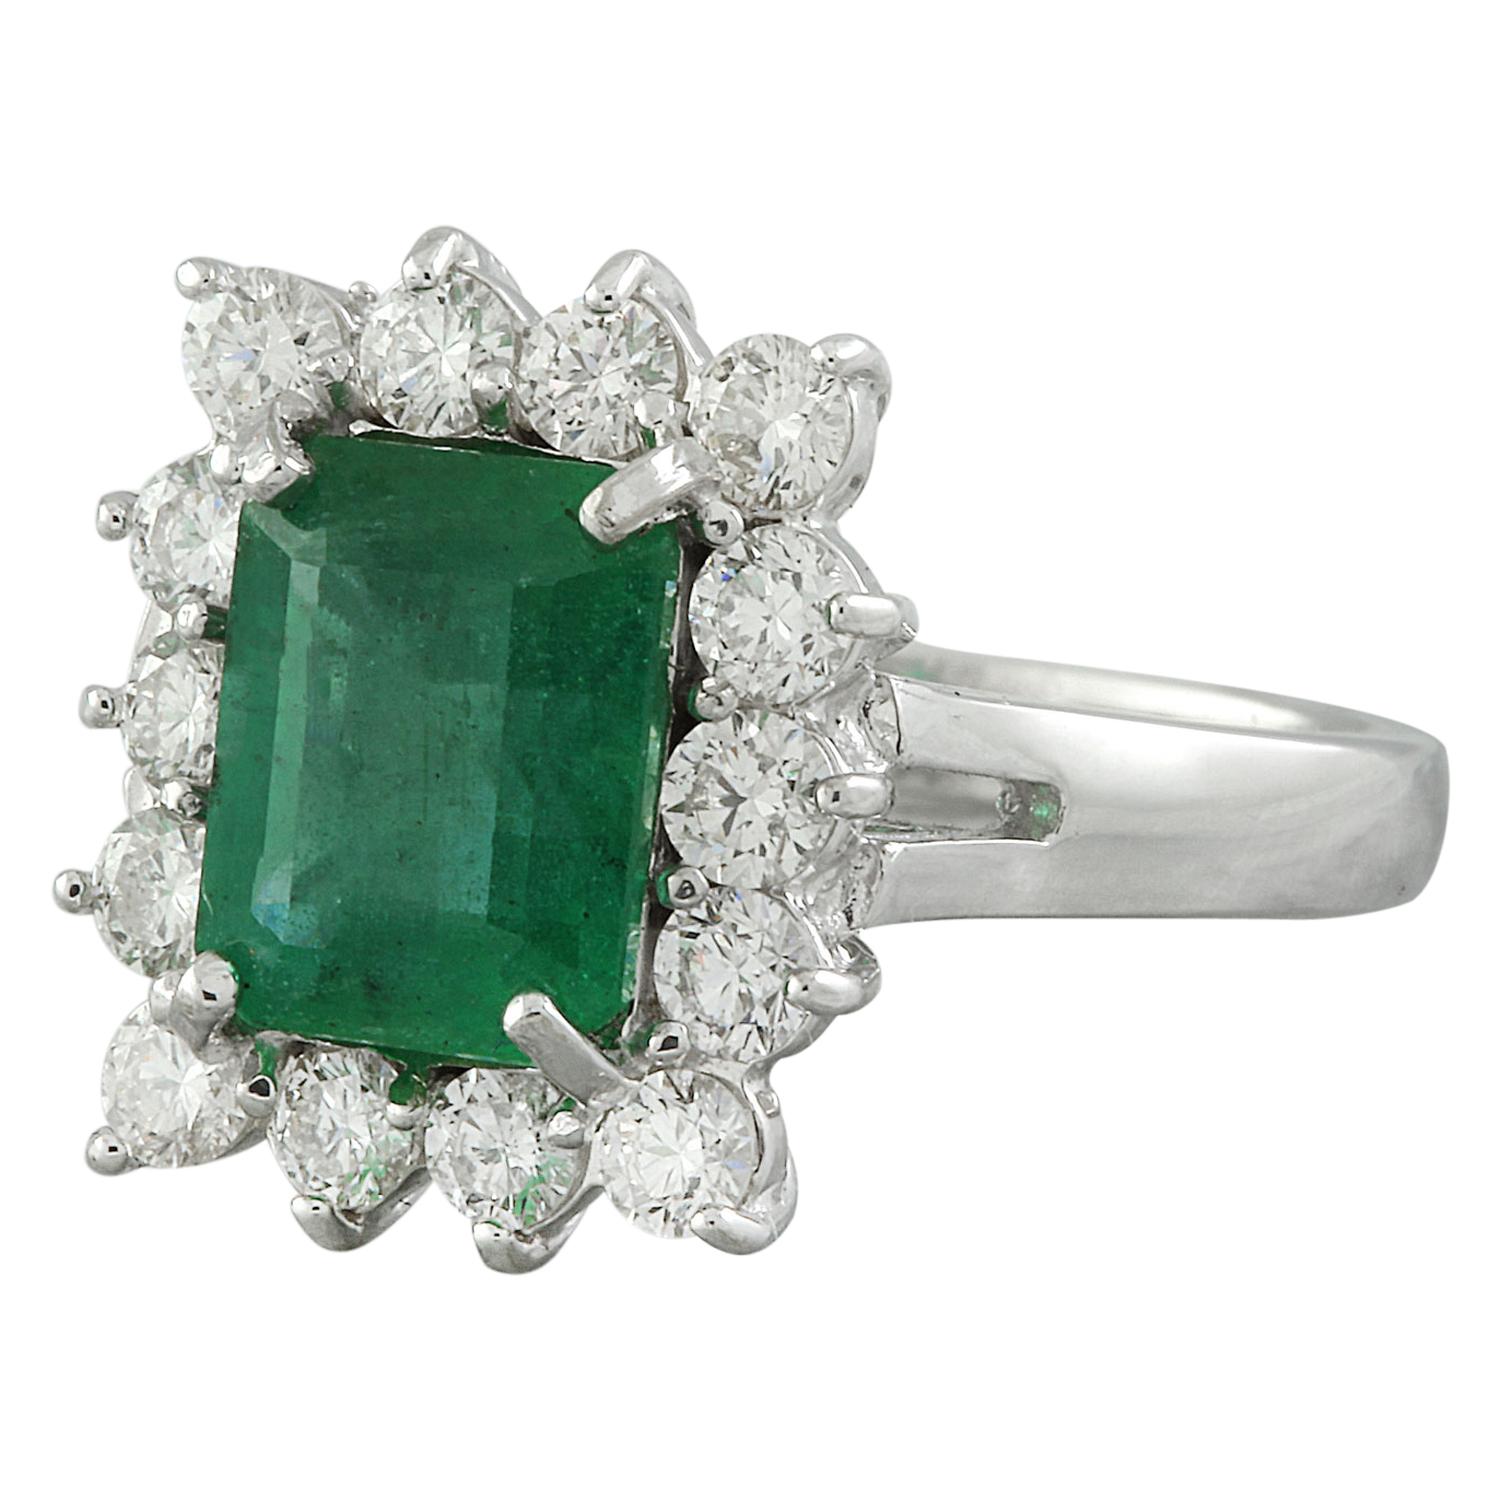 Elevate your style with this exquisite 4.95 Carat Natural Emerald 14K Solid White Gold Diamond Ring. Crafted with precision and stamped with 14K, this stunning ring boasts a total weight of 6.3 grams. The captivating emerald, weighing 3.80 carats